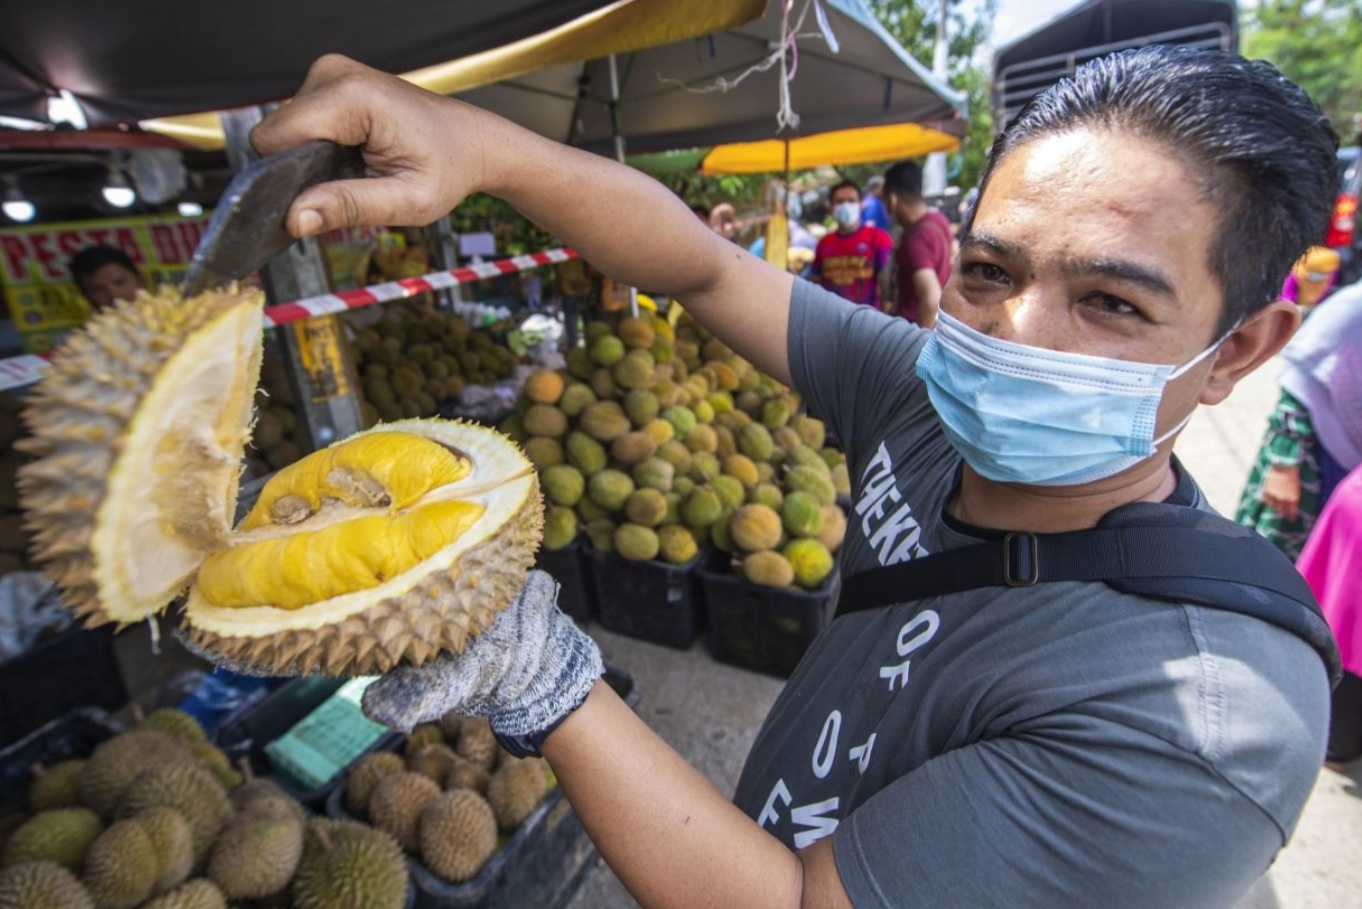 INTERACTIVE: Durian season is in full swing, and here’s what you need to know